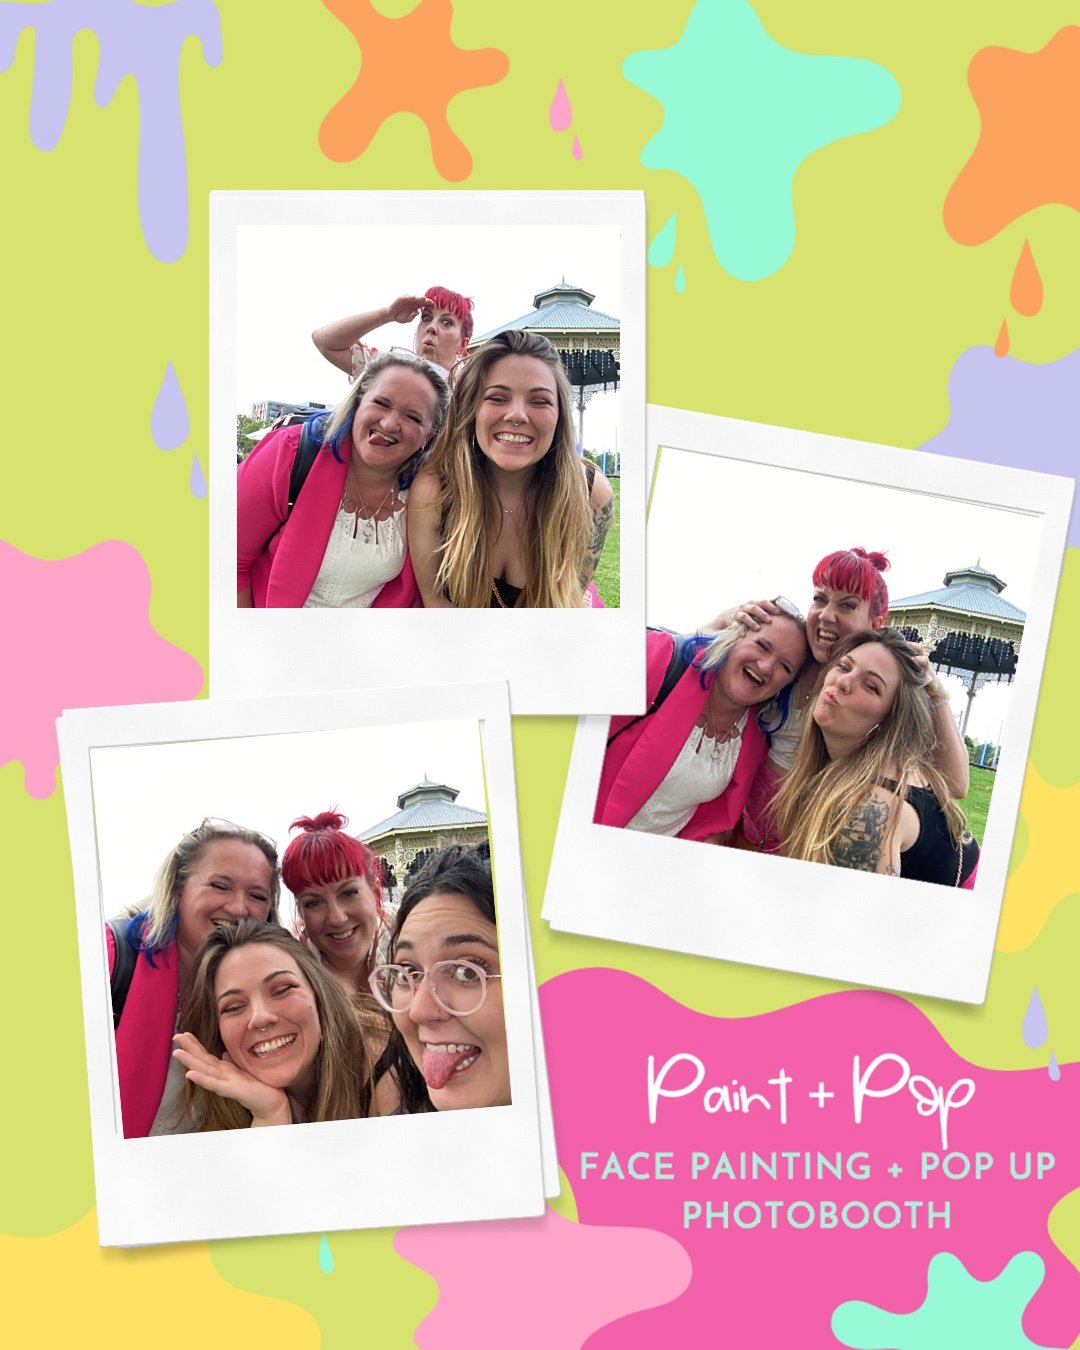 Vintage Photo Booth Rental Footscray Market Paint and Pop Ladies having fun in photobooth